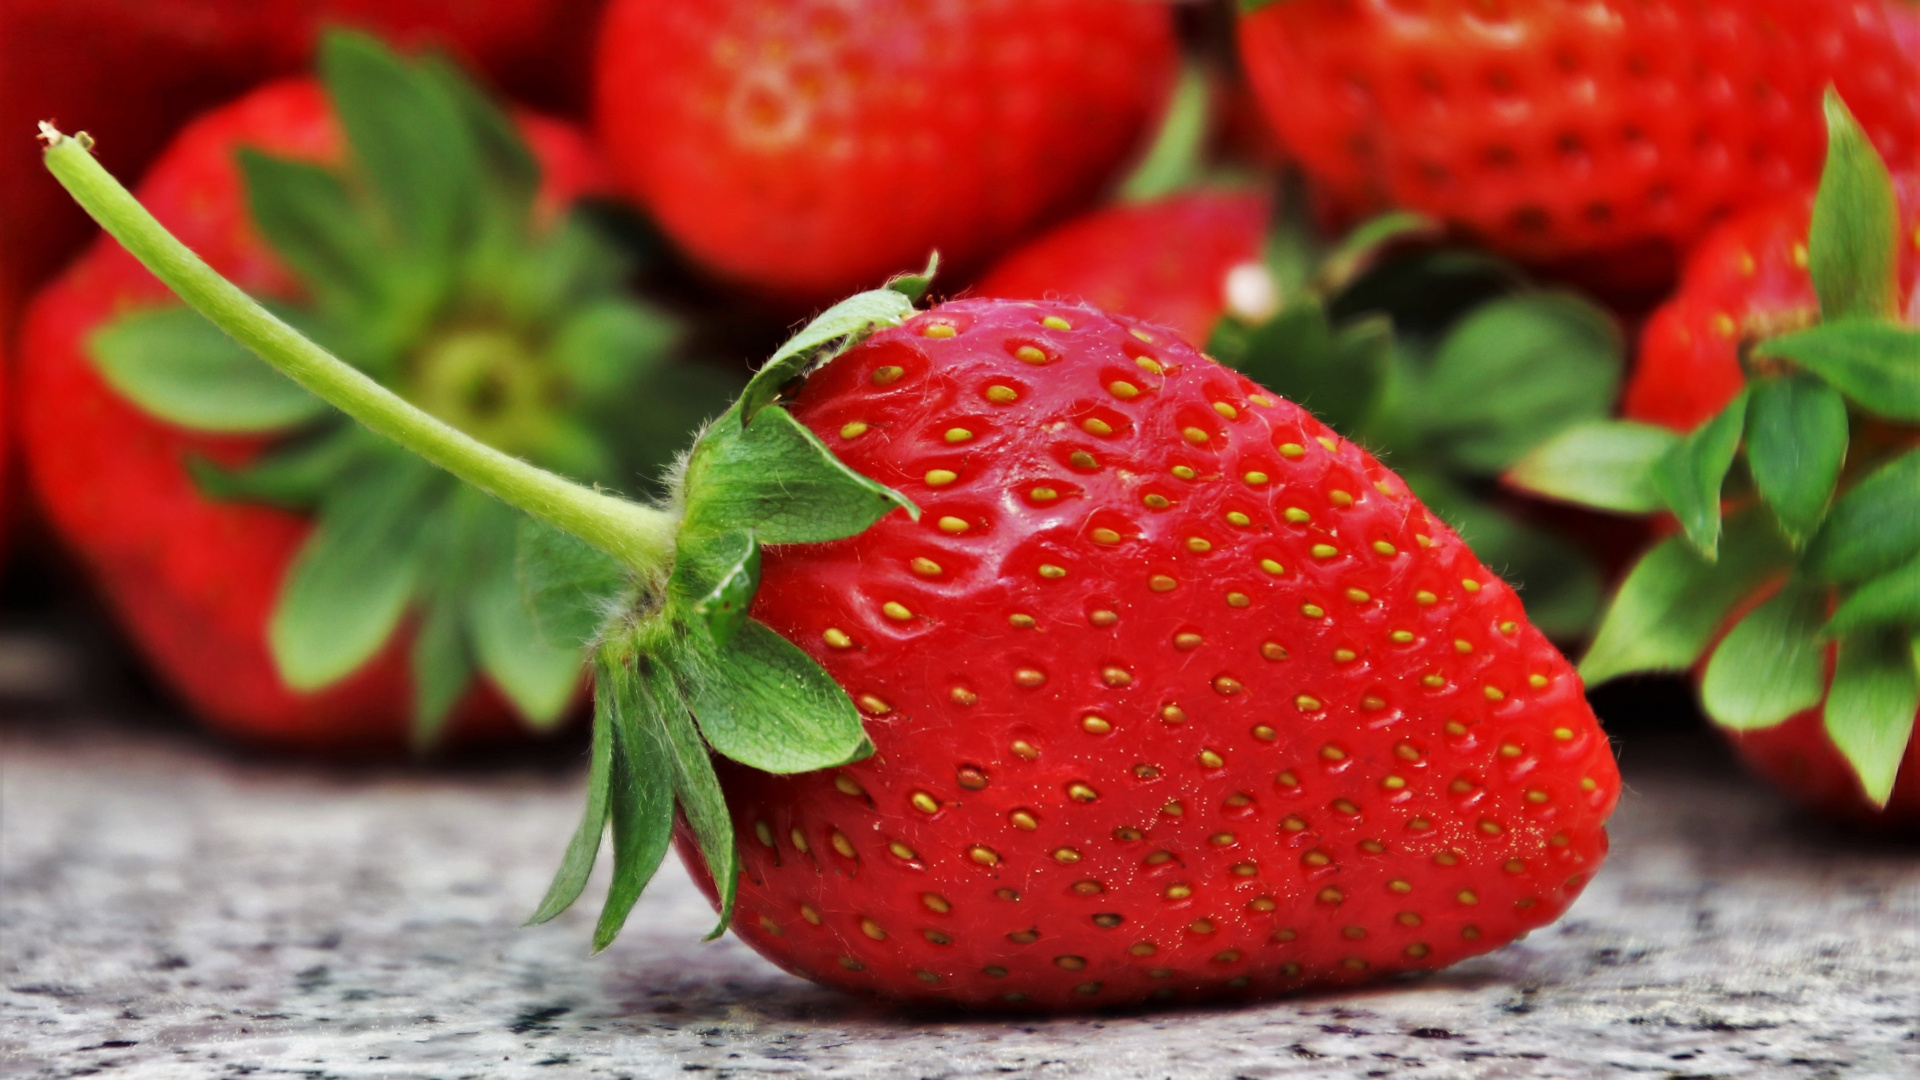 Red Strawberries on White Textile. Wallpaper in 1920x1080 Resolution